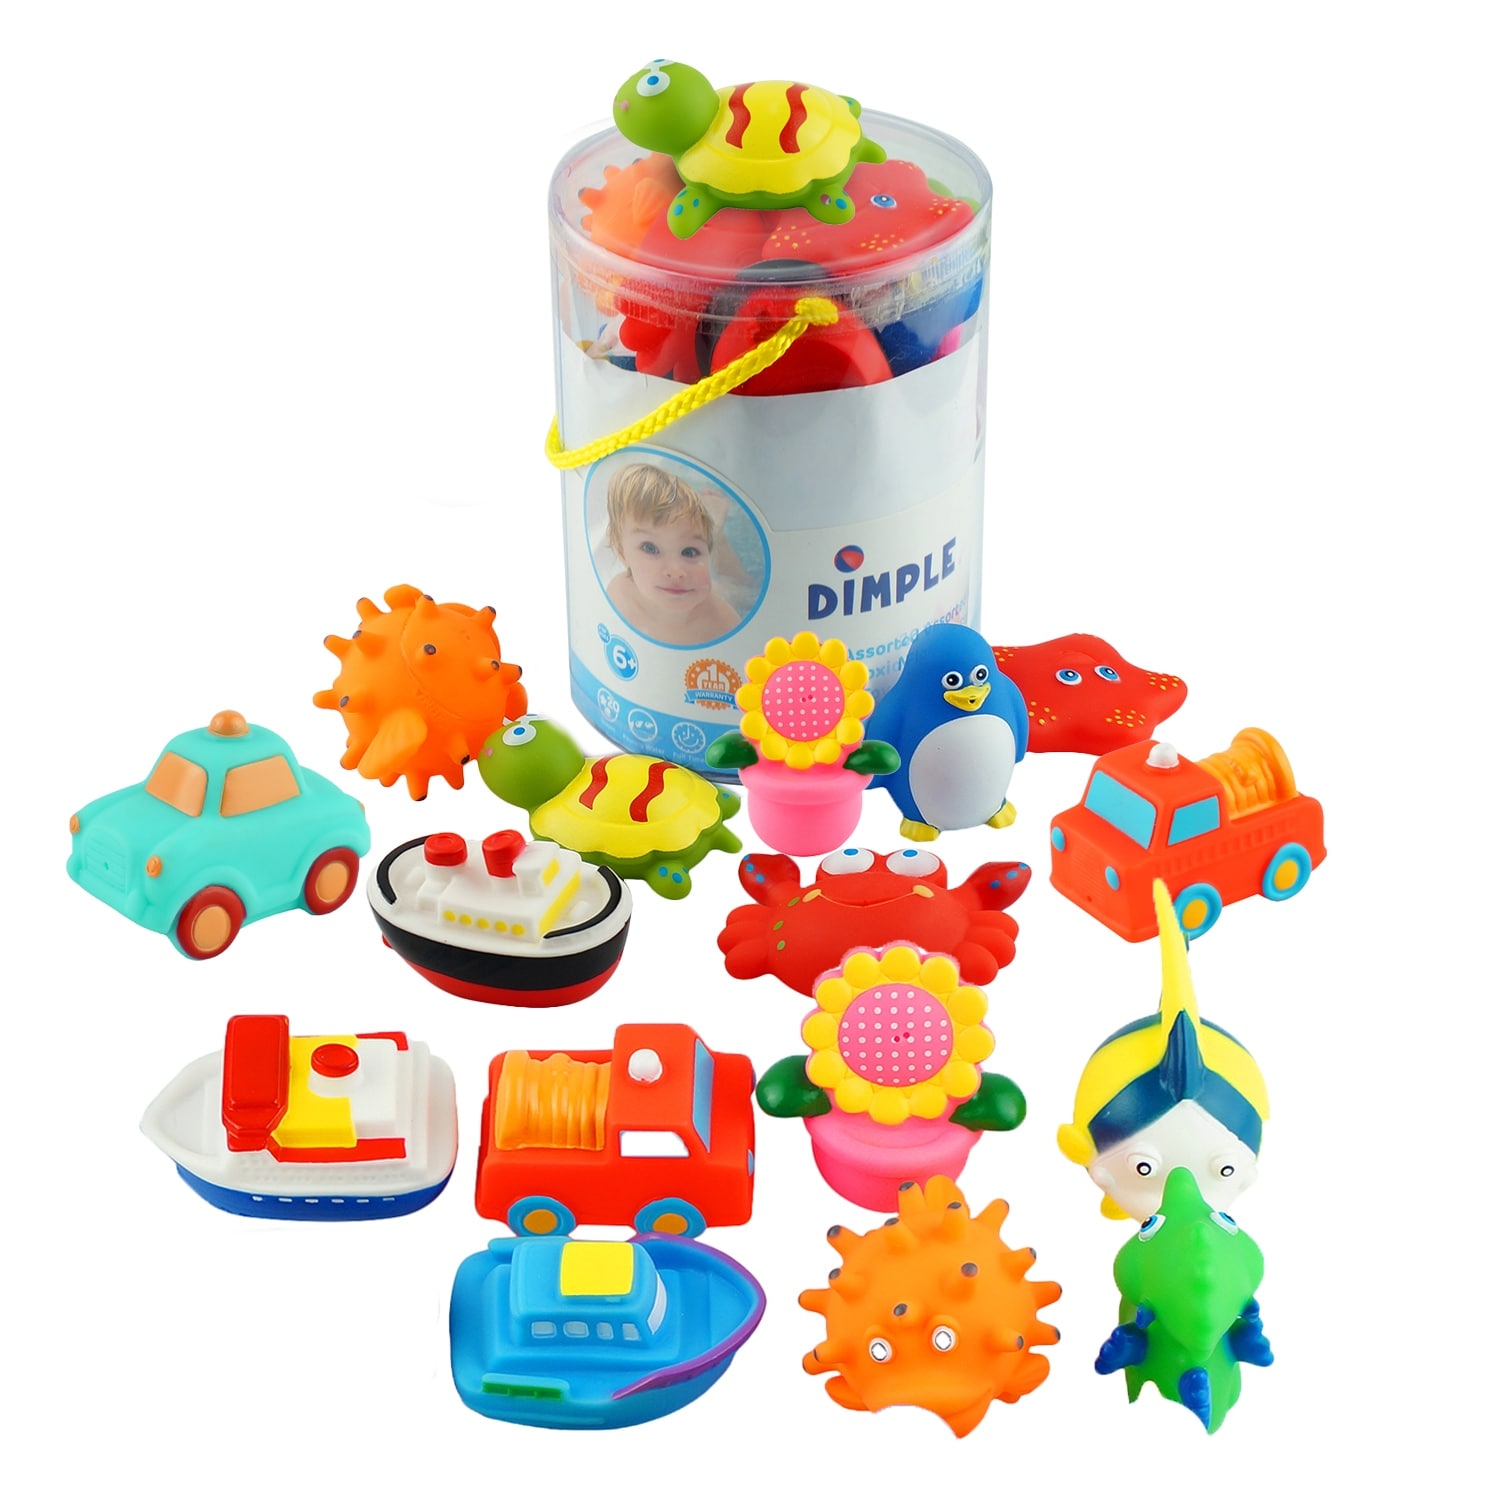 Dimple Set of 20 Floating Bath Toys with 20 Differ...